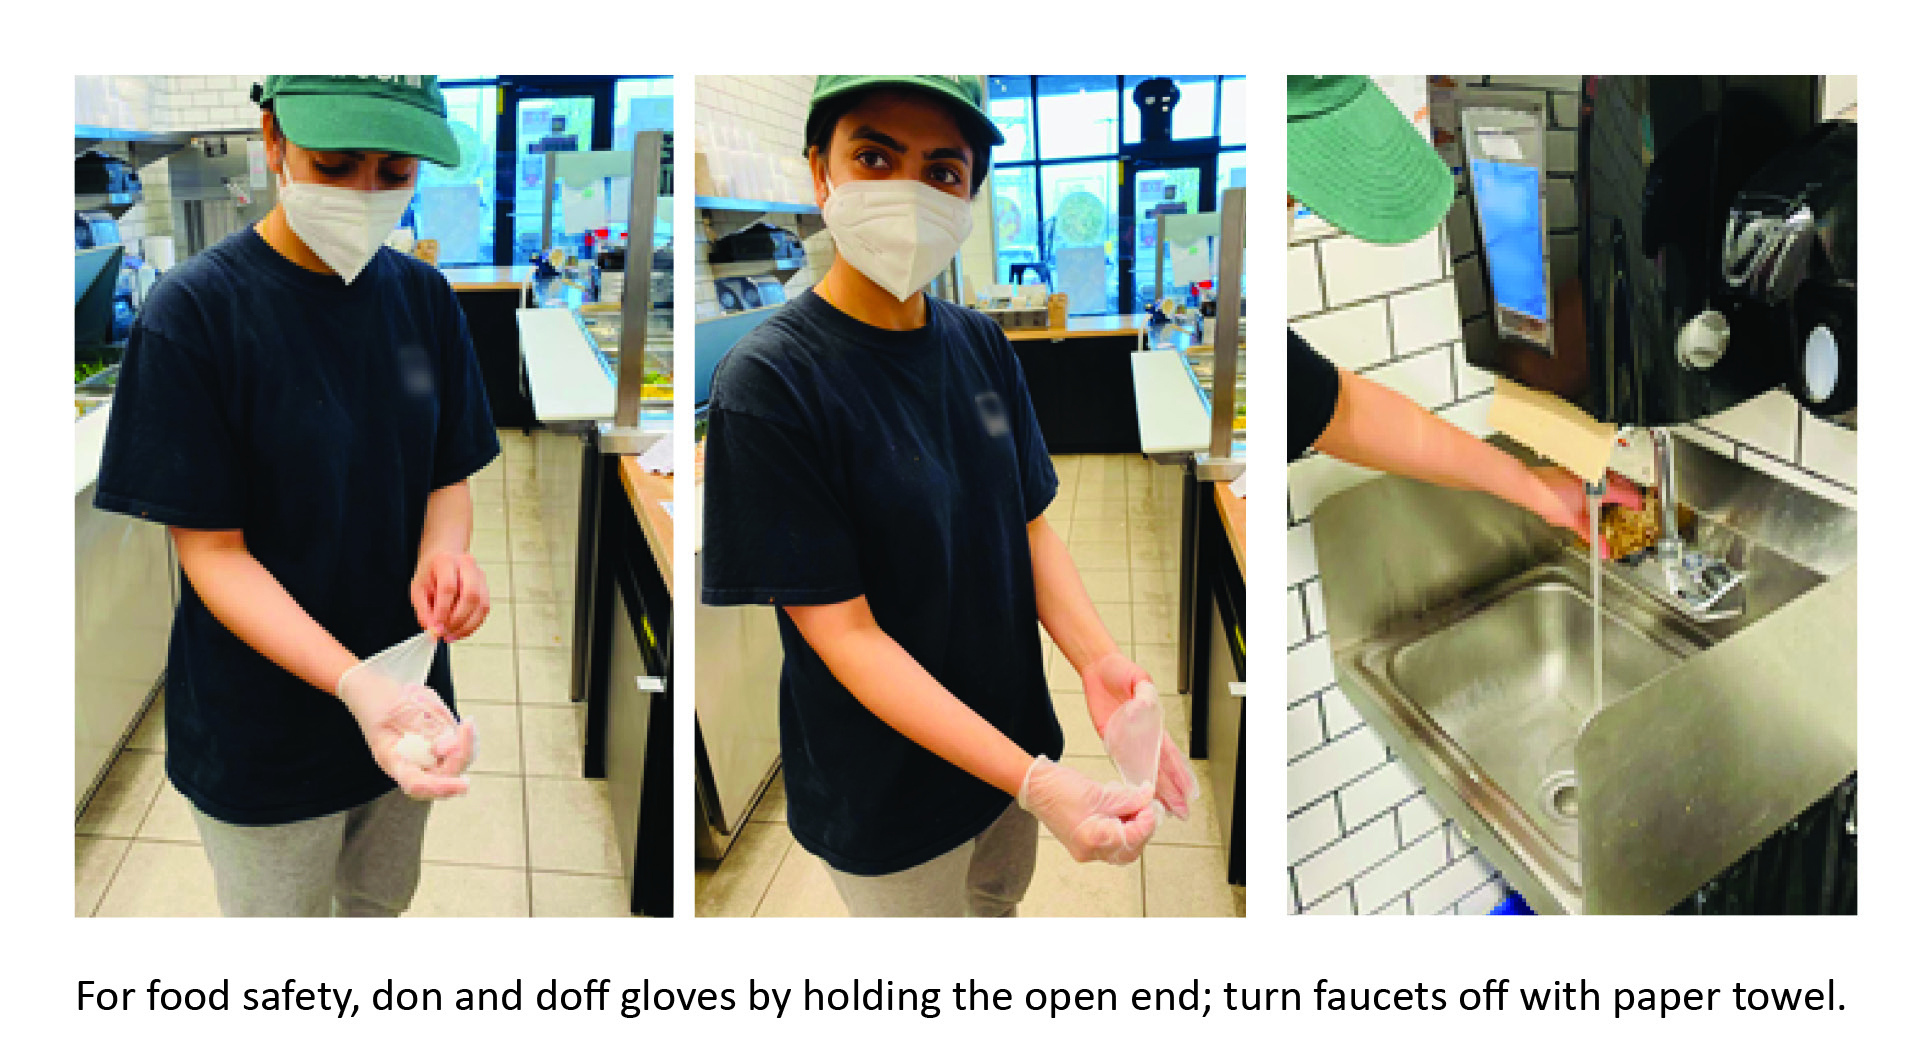 For food safety, don and doff gloves by holding the open end; turn faucets off with a paper towel. 